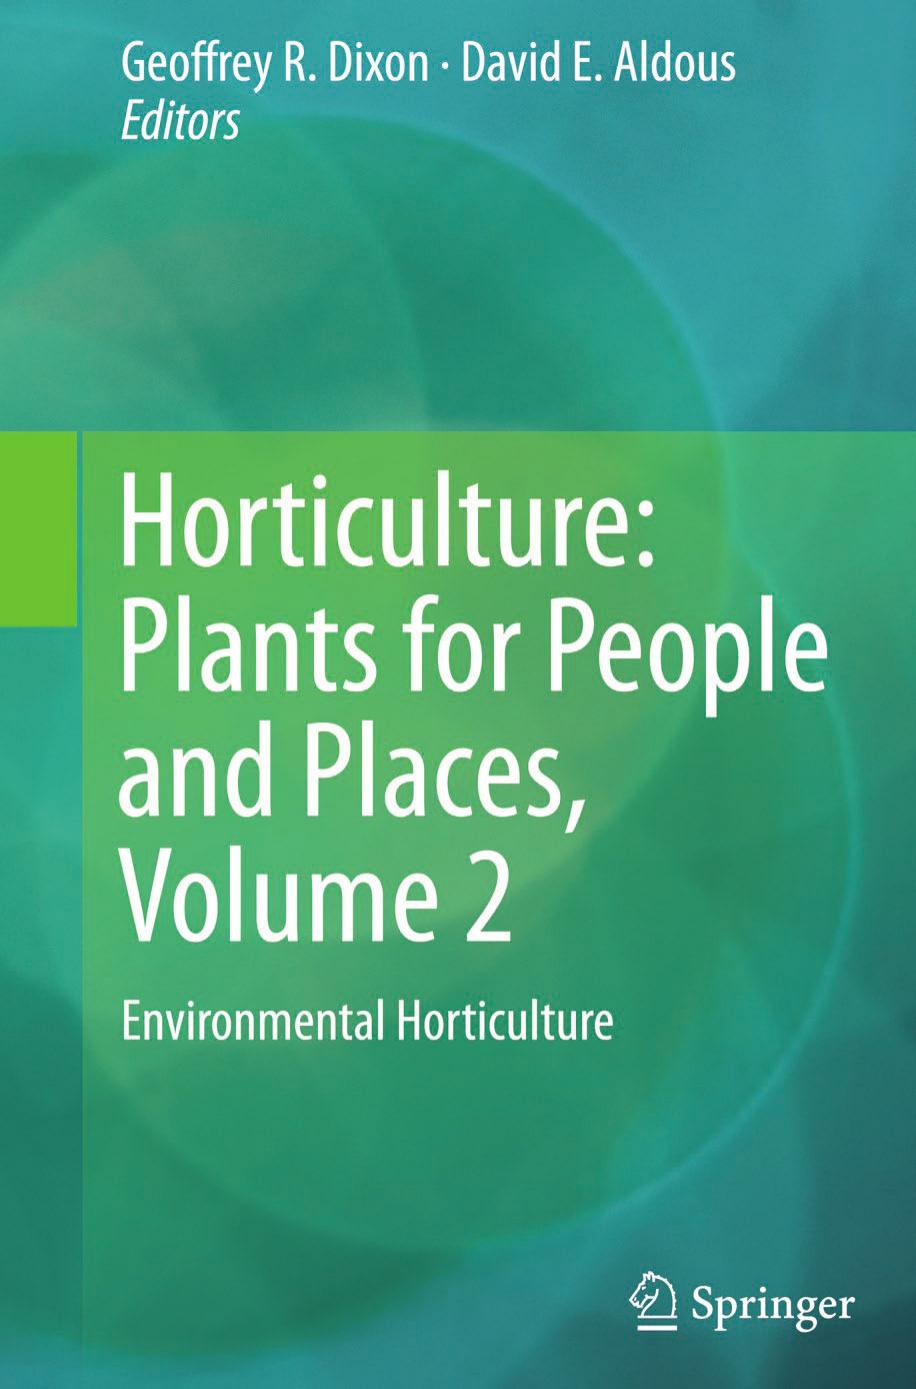 Horticulture  Plants for People and Places, Volume 2  Environmental Horticulture 2014